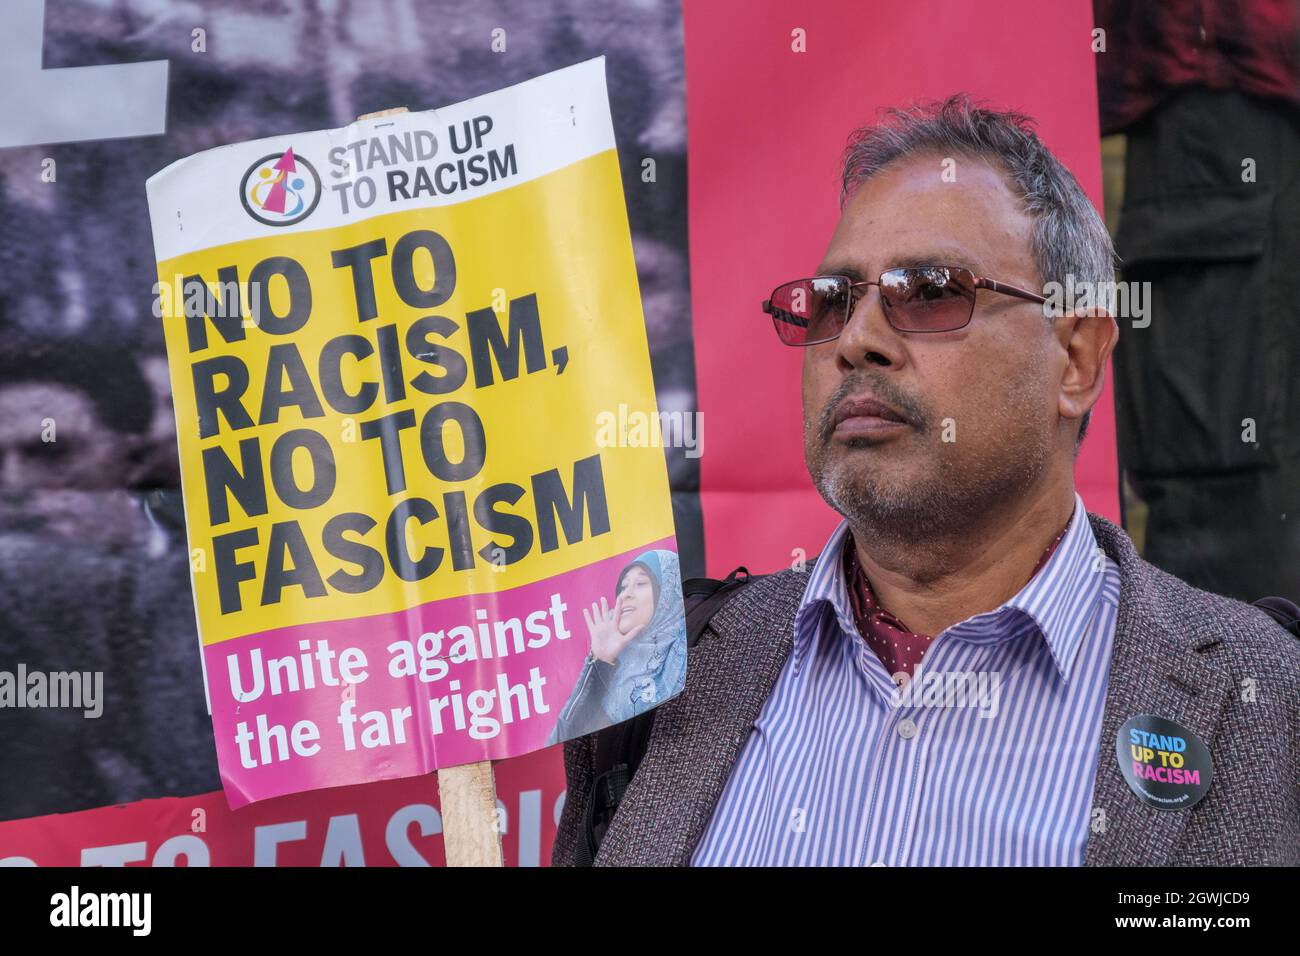 London, UK. 3rd Oct 2021. A man holds a placard against racism and fascism at the rally on the 85th anniversary of the Battle of Cable St to remember the act of unity against the fascist threat when the Jewish and Irish communities of East London and their allies blocked the streets to prevent Oswald Mosley and his British Union of Fascists marching through. They marched from Dock St along Cable St to a rally next to the mural in St George's Gardens chaired by Jewish historian David Rosenberg and local Bengali activist Julie Begum. Peter Marshall/Alamy Live News Stock Photo